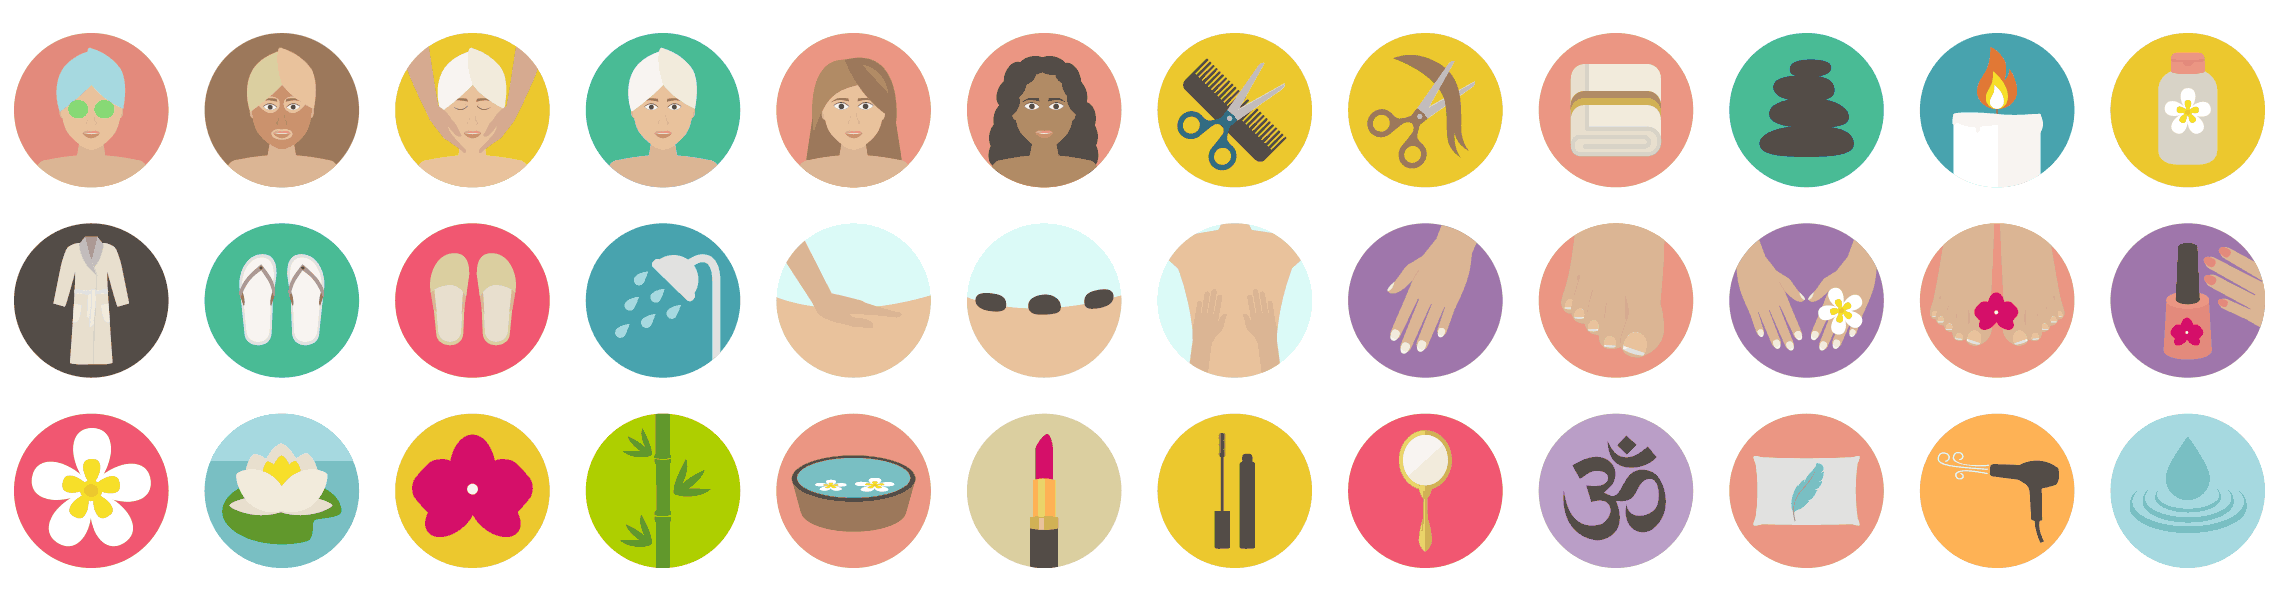 wellness-and-spa-flat-icons-vol-1-preview